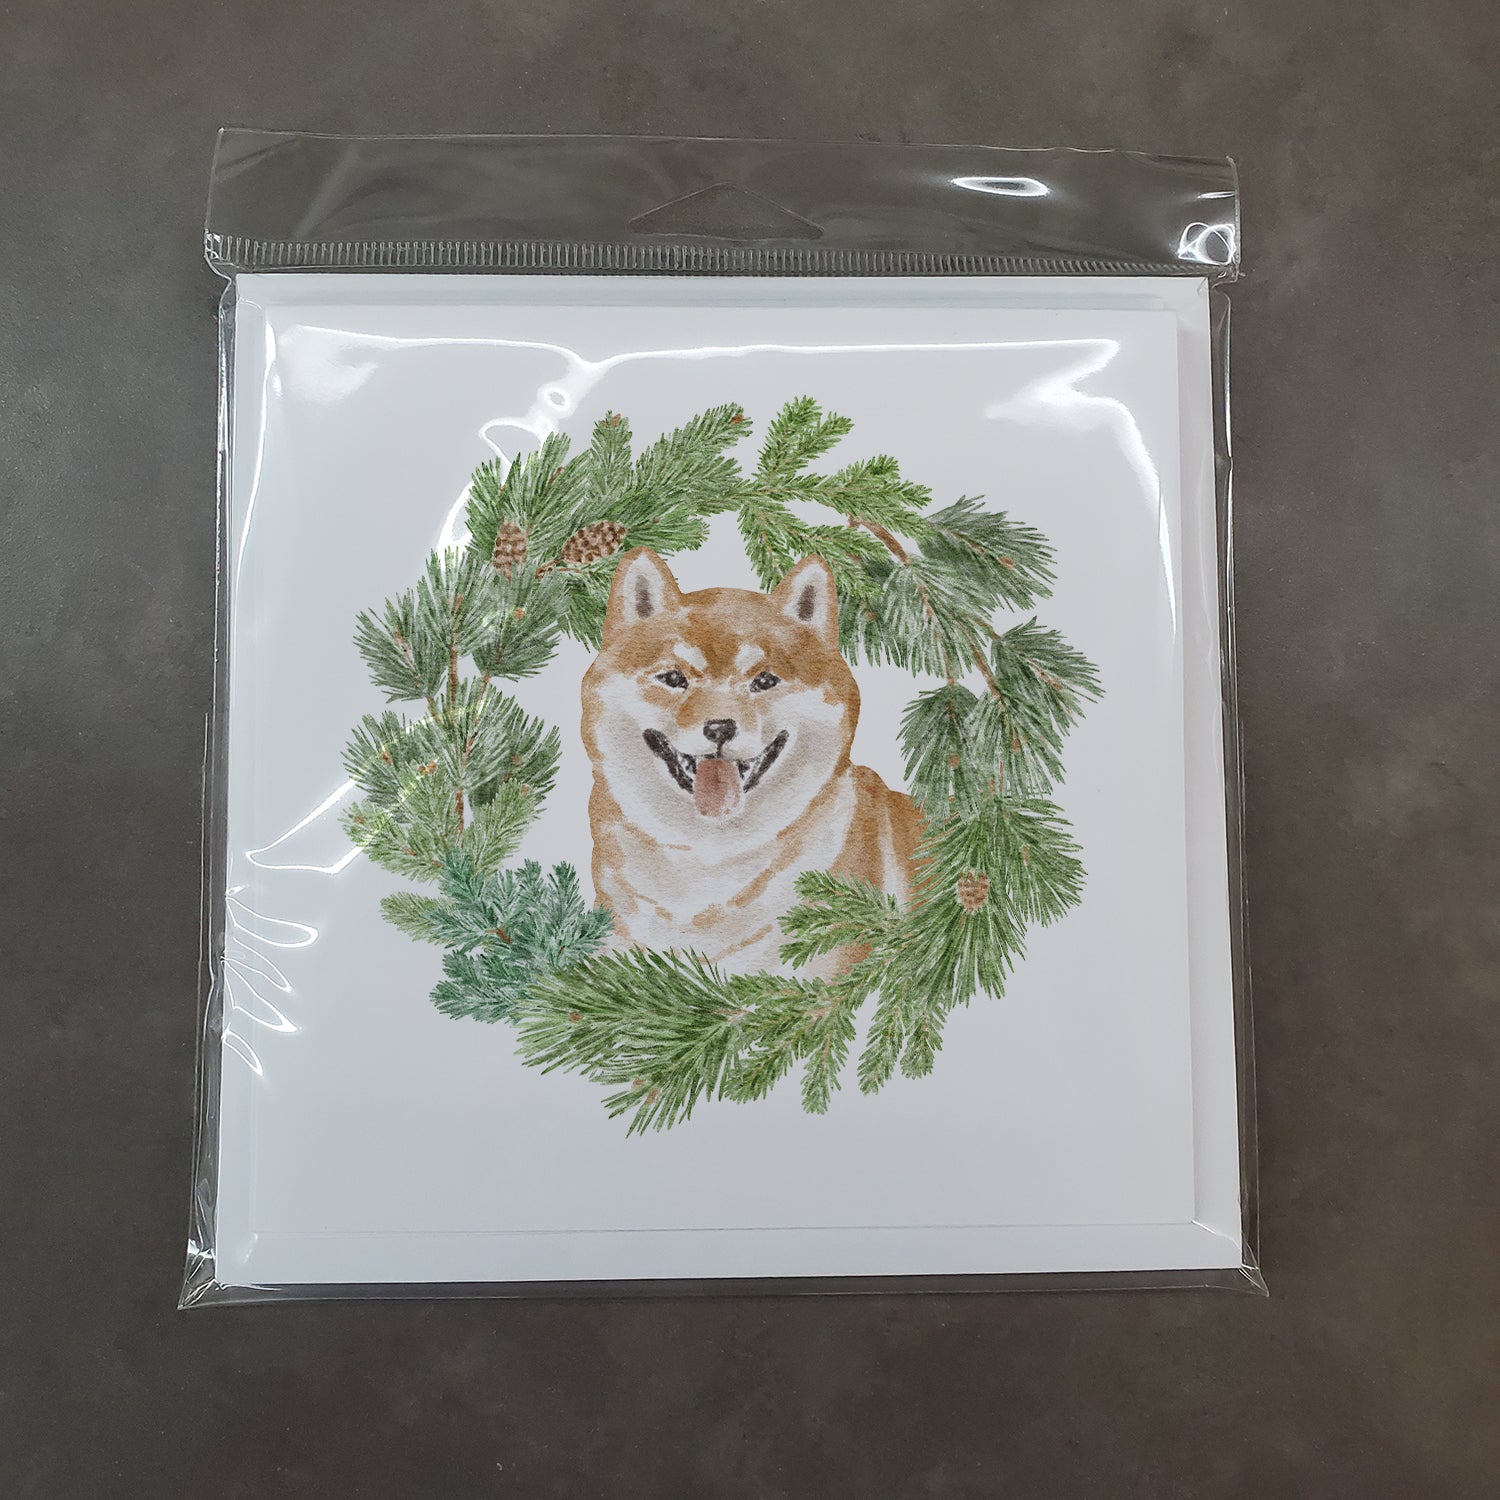 Shiba Inu Smiling with Christmas Wreath Square Greeting Cards and Envelopes Pack of 8 - the-store.com